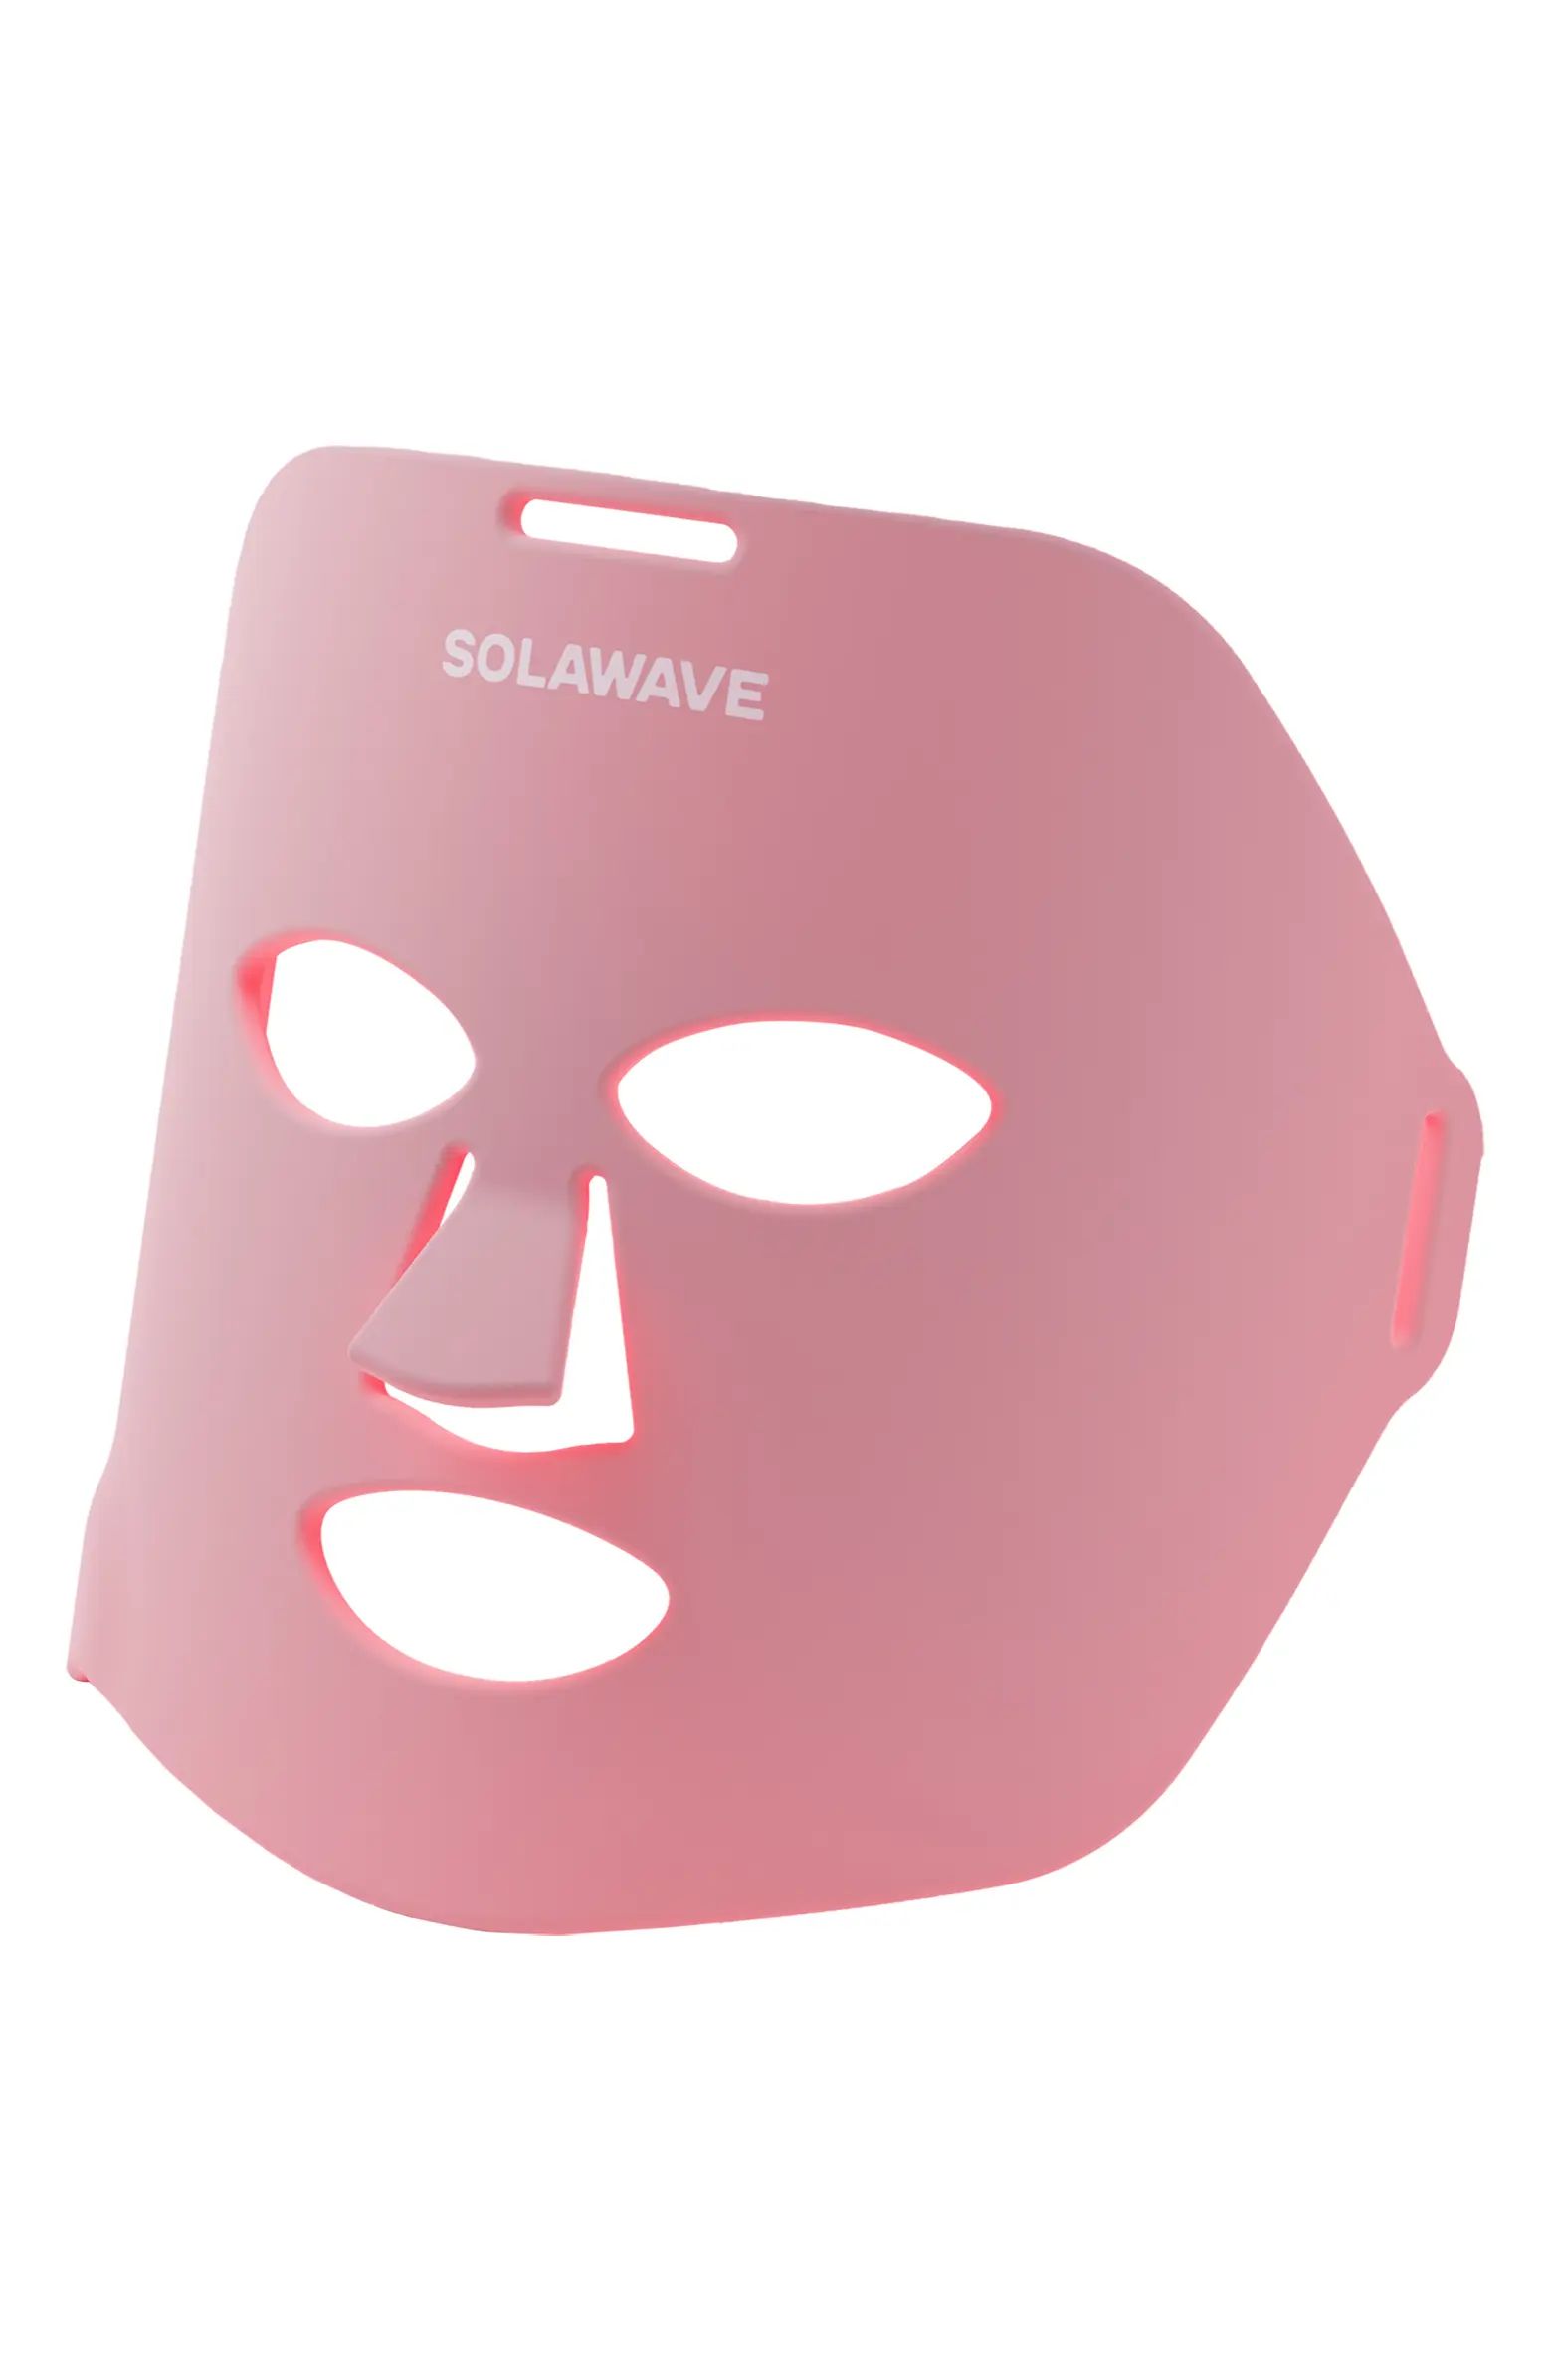 Wrinkle & Acne Clearing Light Therapy Mask | Nordstrom